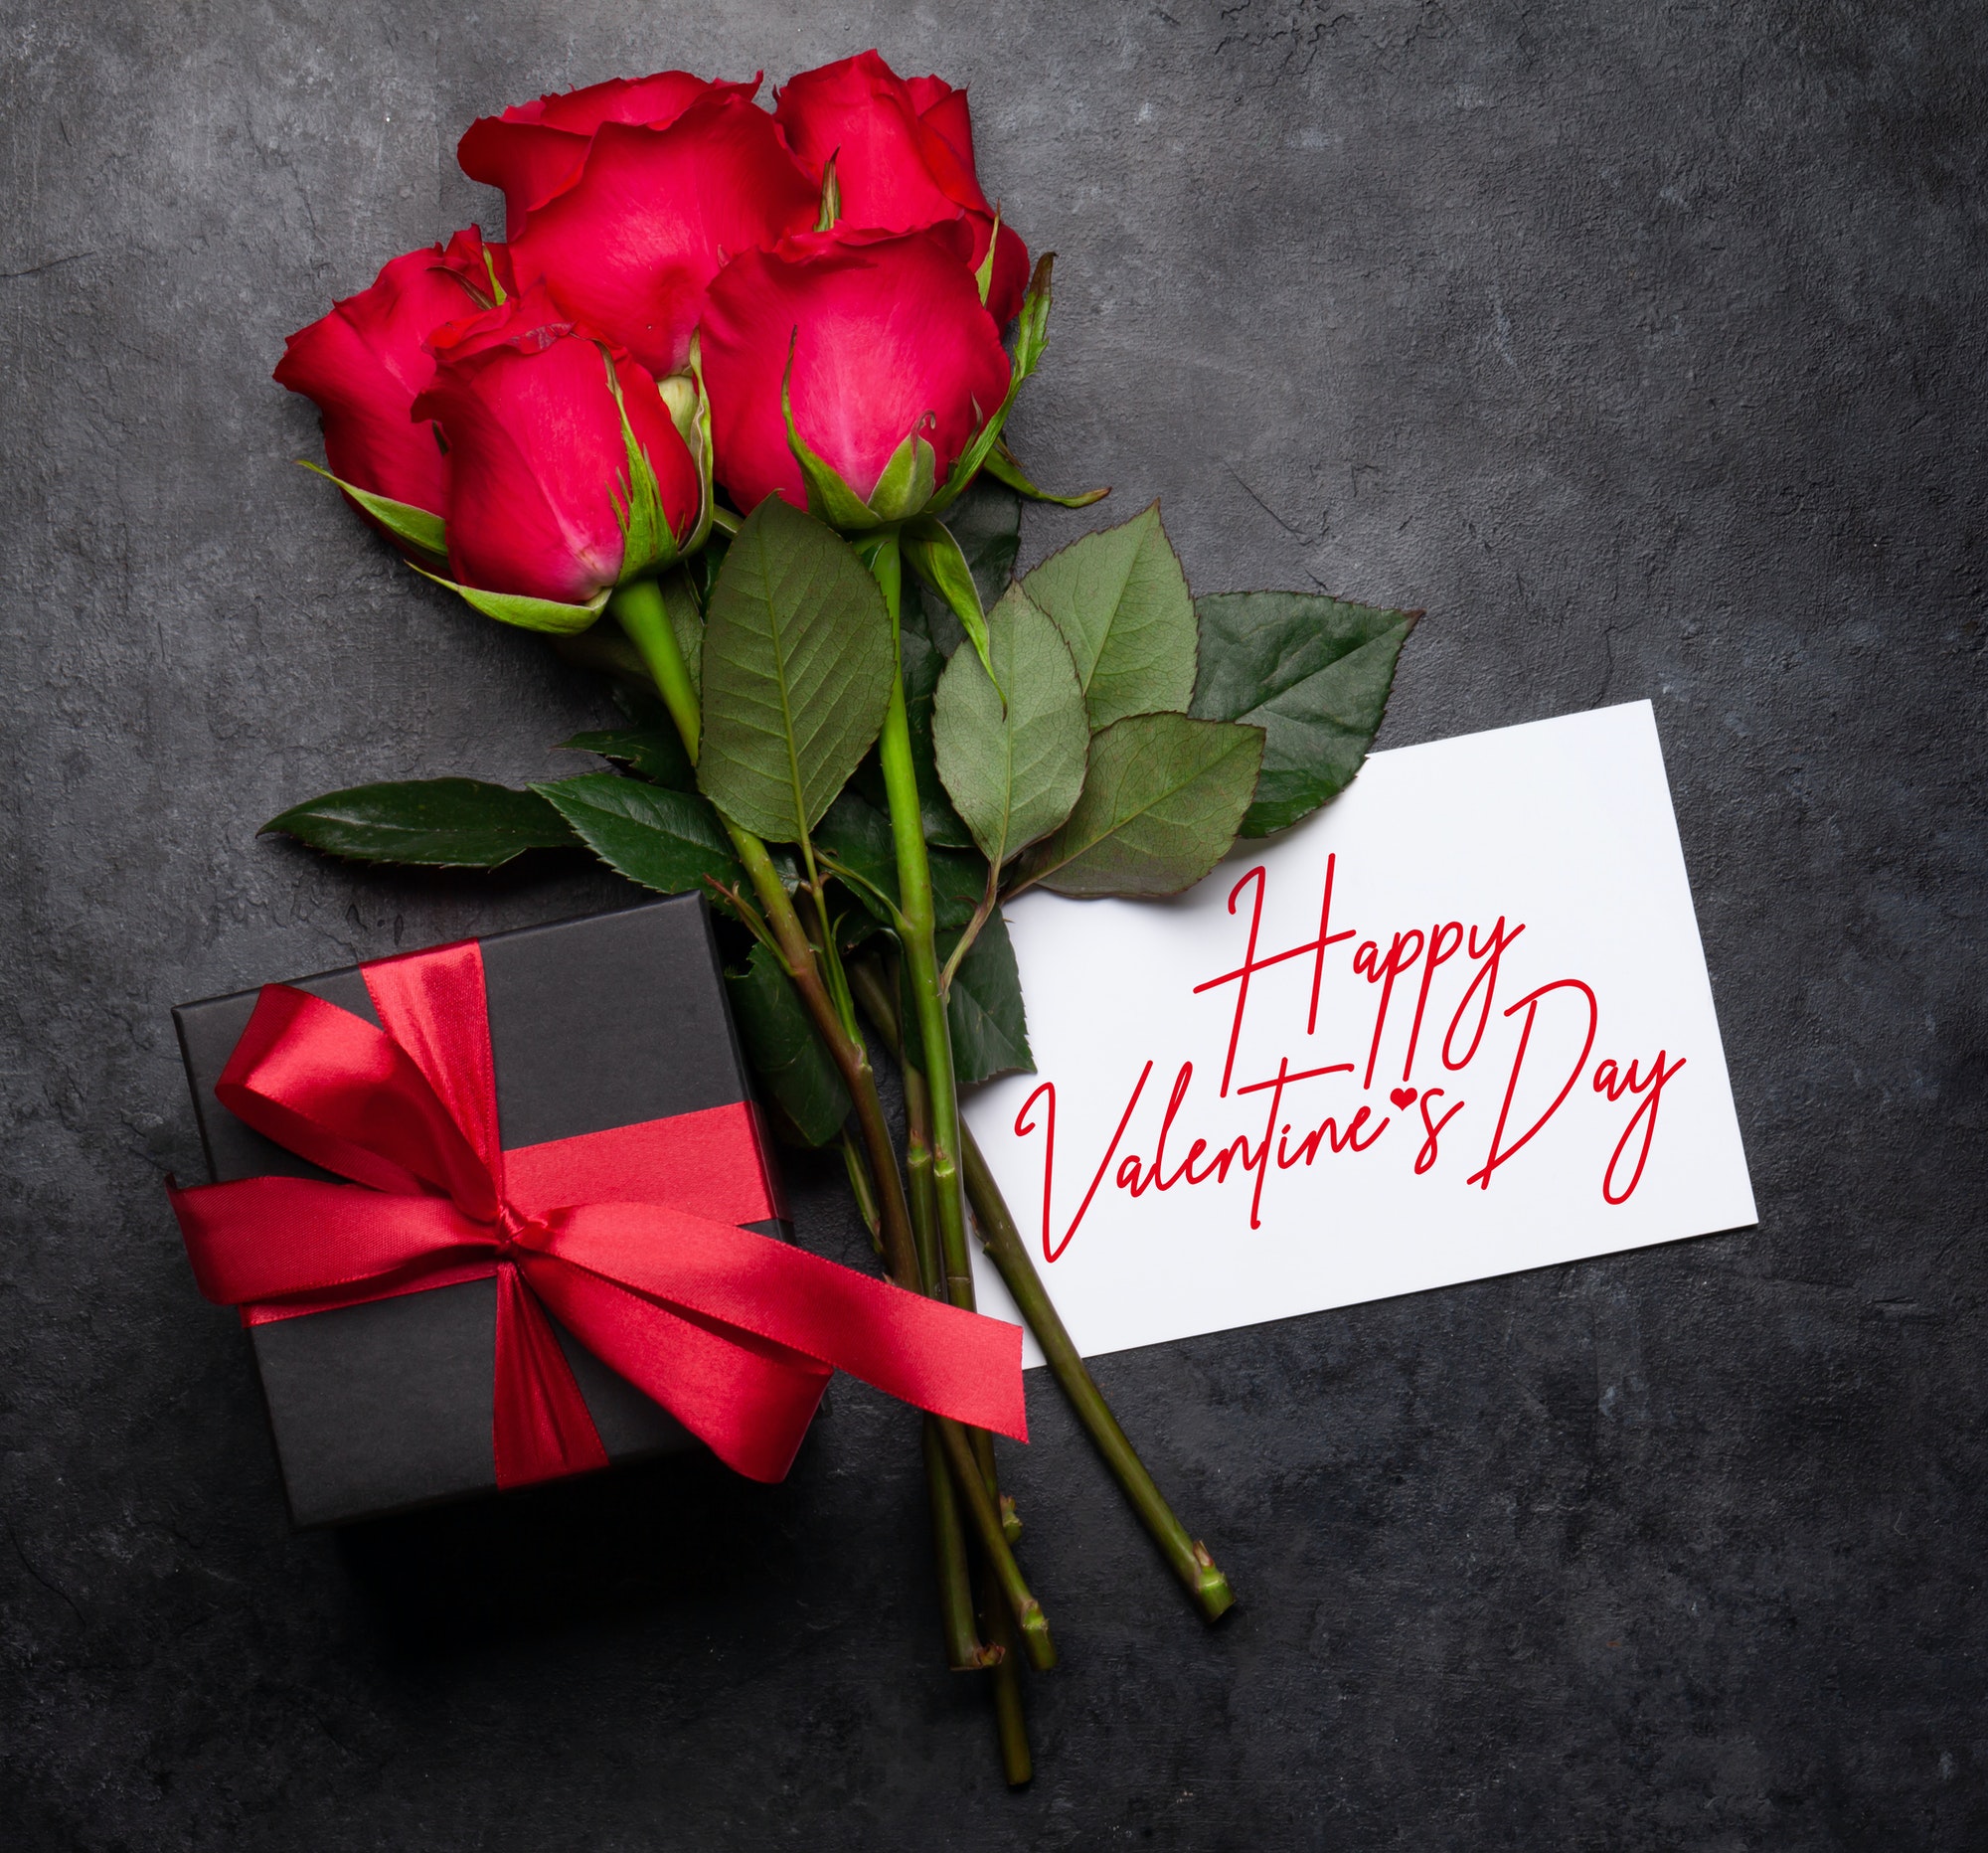 Valentines day greeting card with rose flowers and gift box